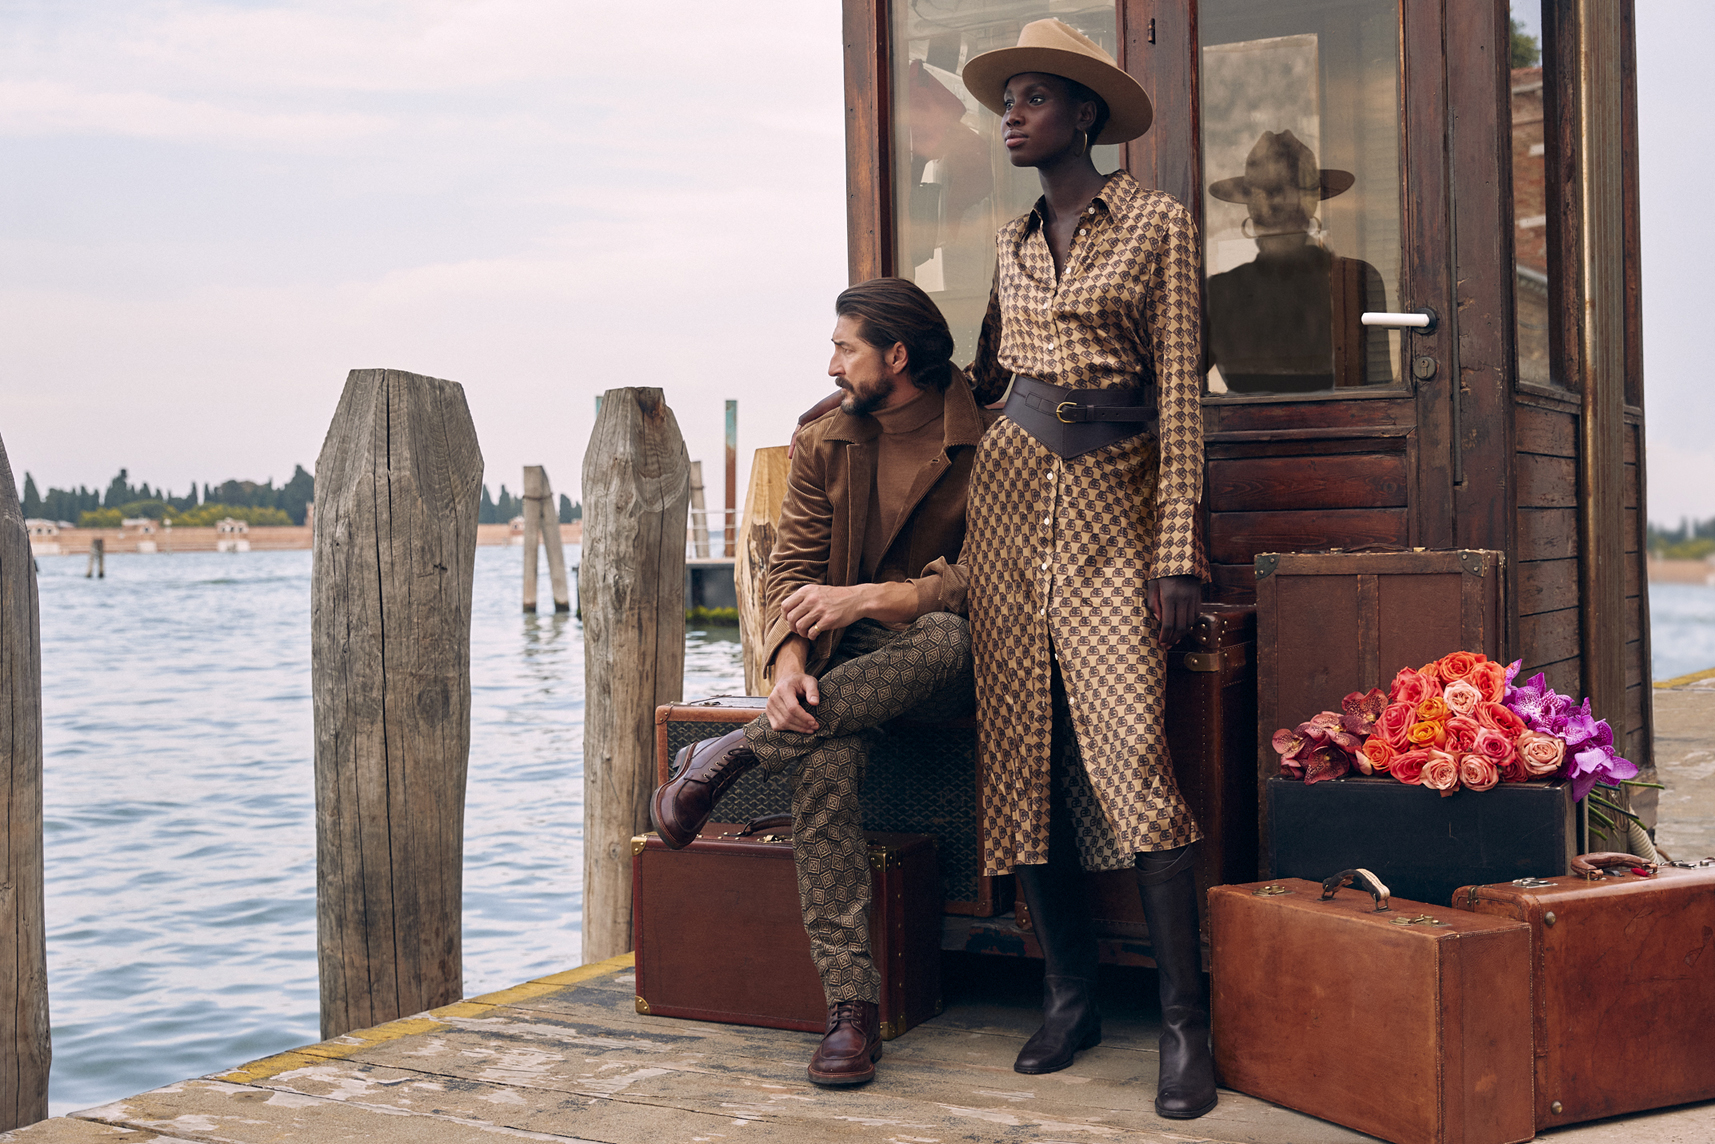 Banana republic marks a new journey with the fall 2022 collection – enchanter's delight